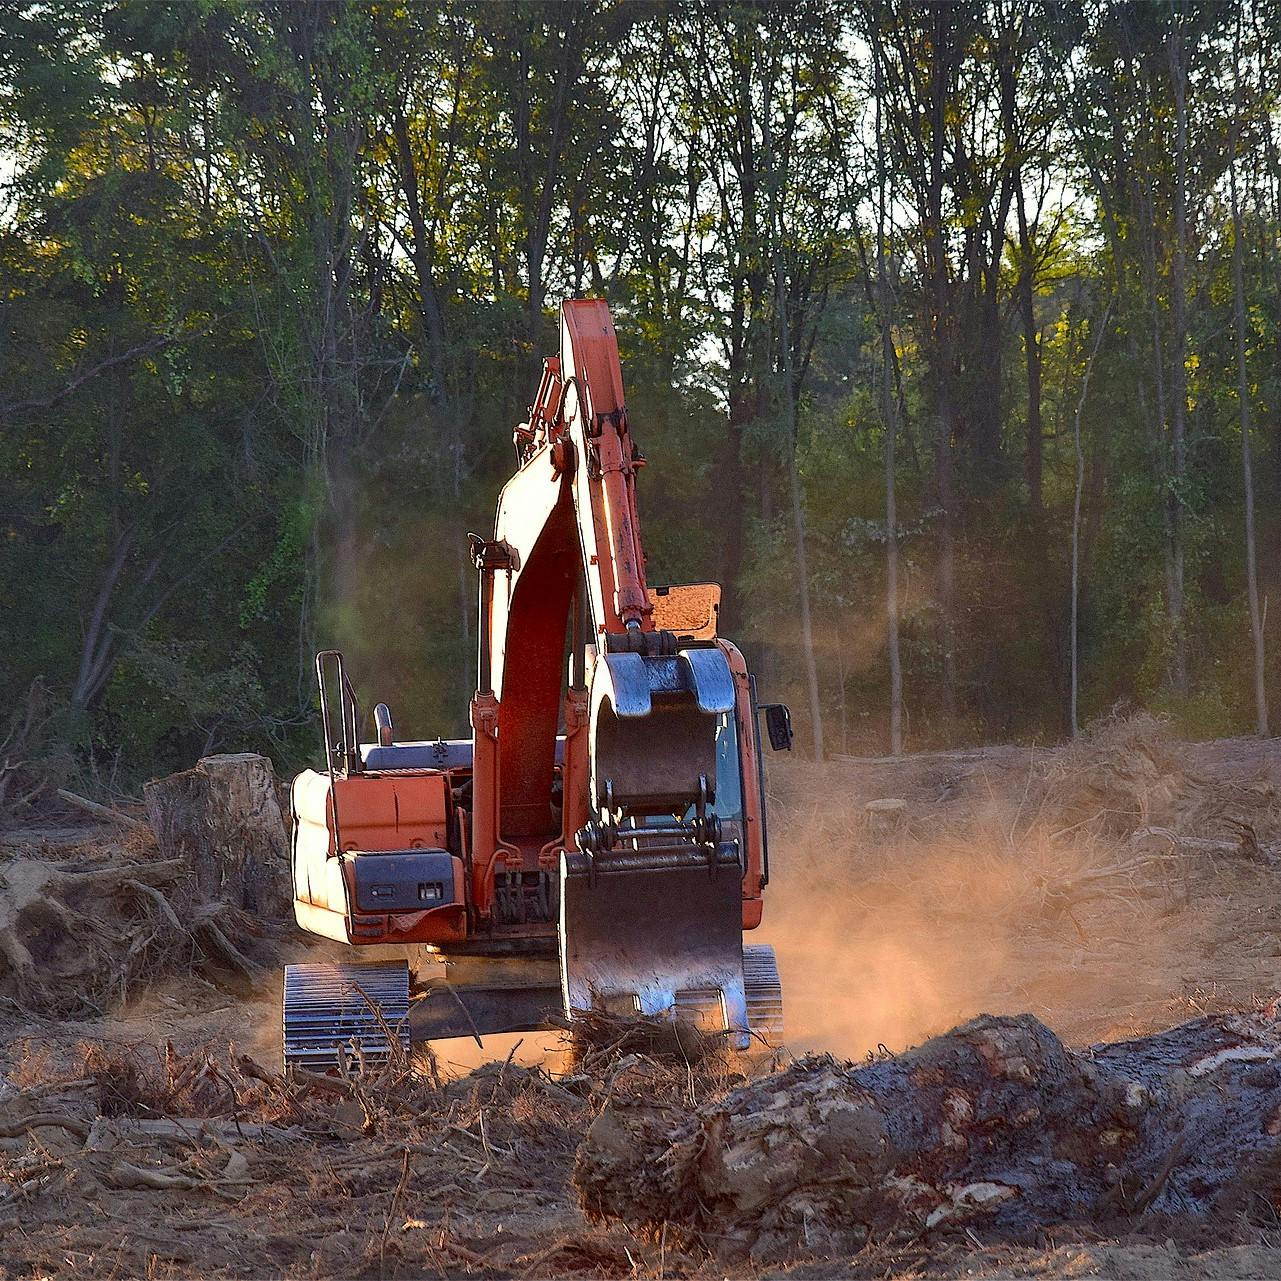 A large digger deforesting an area of rainforest. Going vegan will have a significant impact on lowering your environmental impact. 